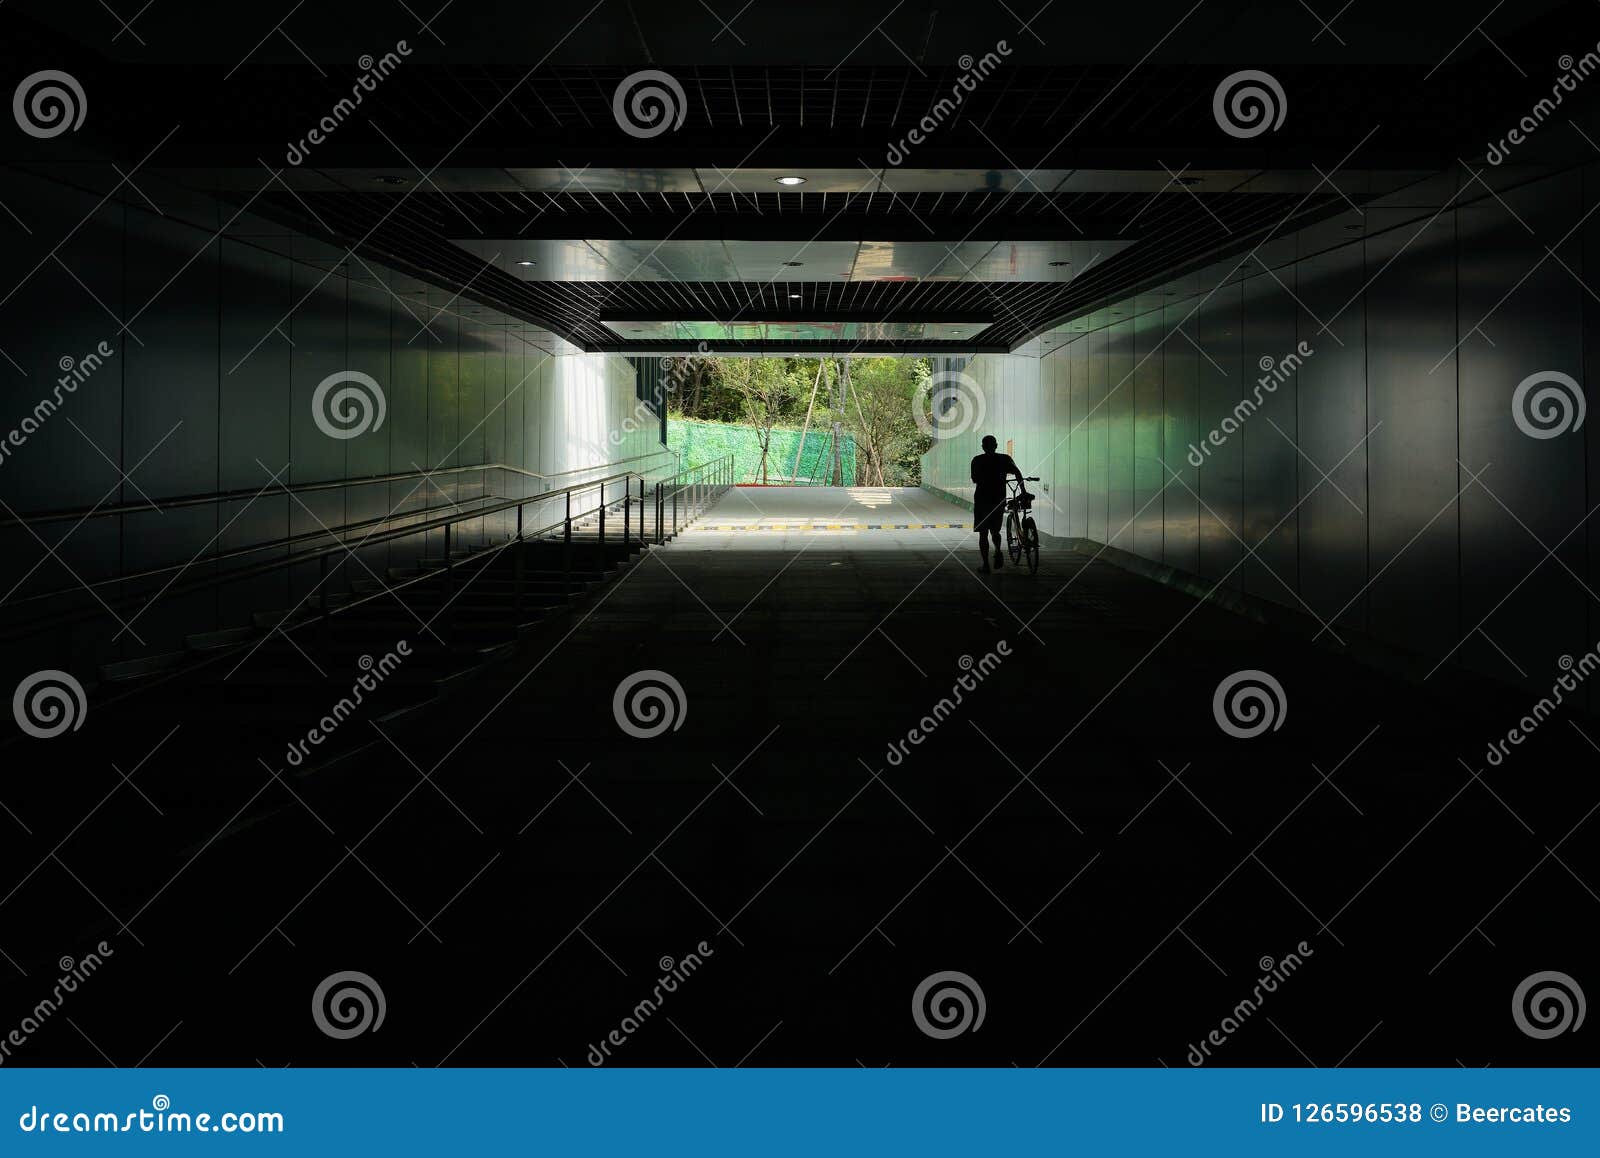 Silhouette Of Man Walking With Bike On Upslope In Road Tunnel Wi Stock ... Silhouette Man Walking Tunnel